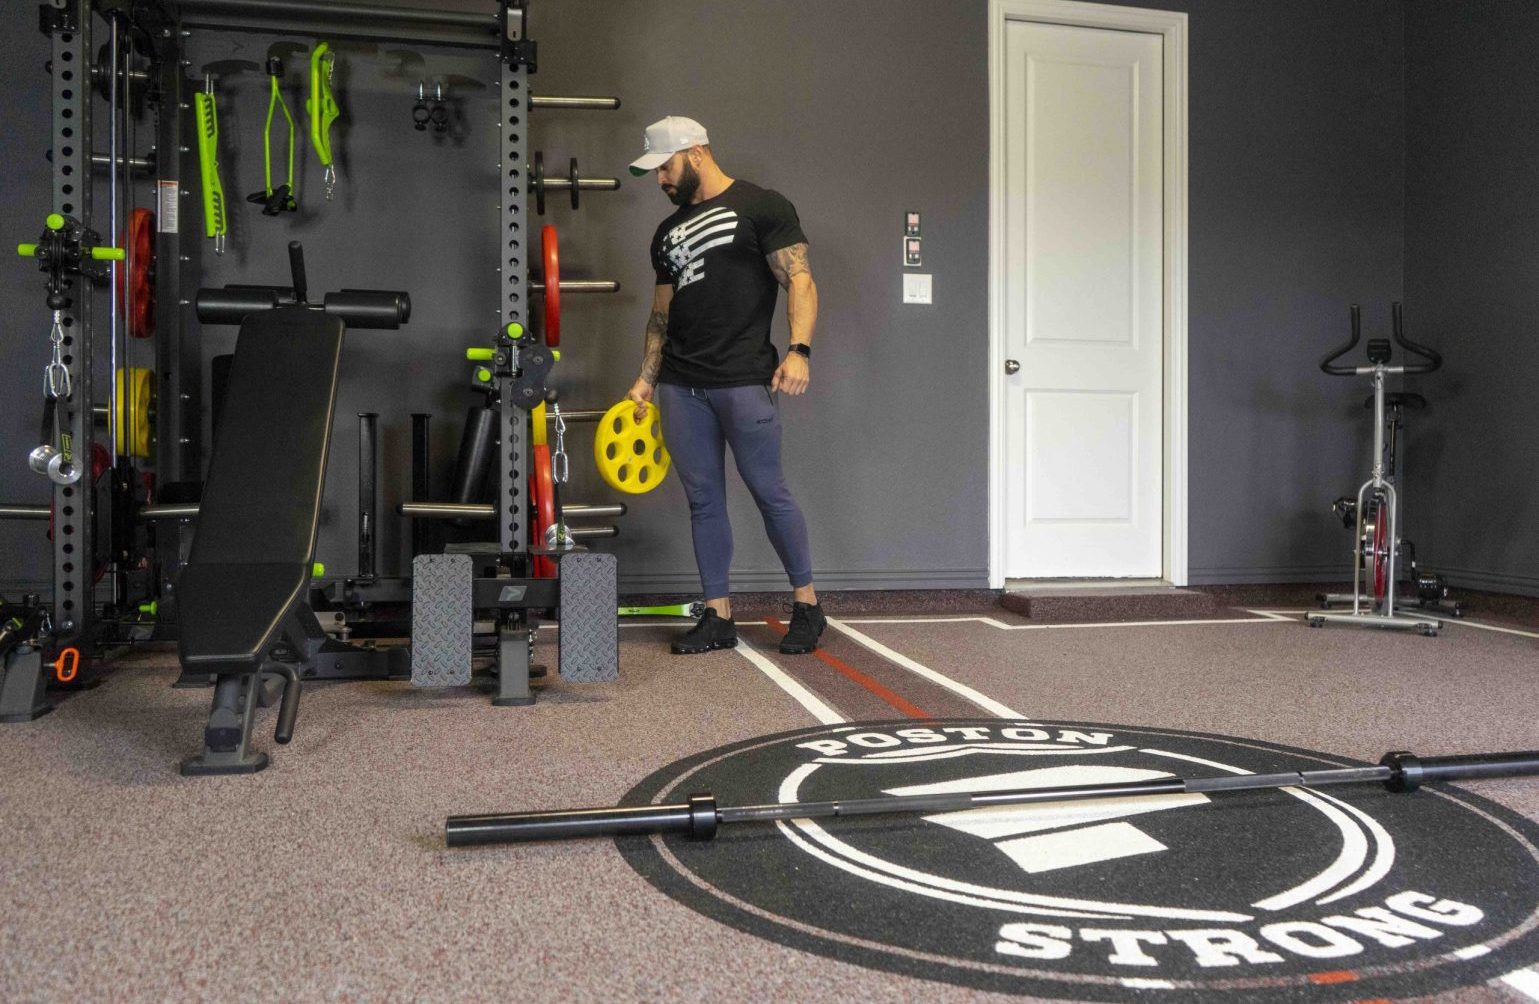 Need Durable Flooring for Your Home Gym or Workshop. Consider These 6 Solutions